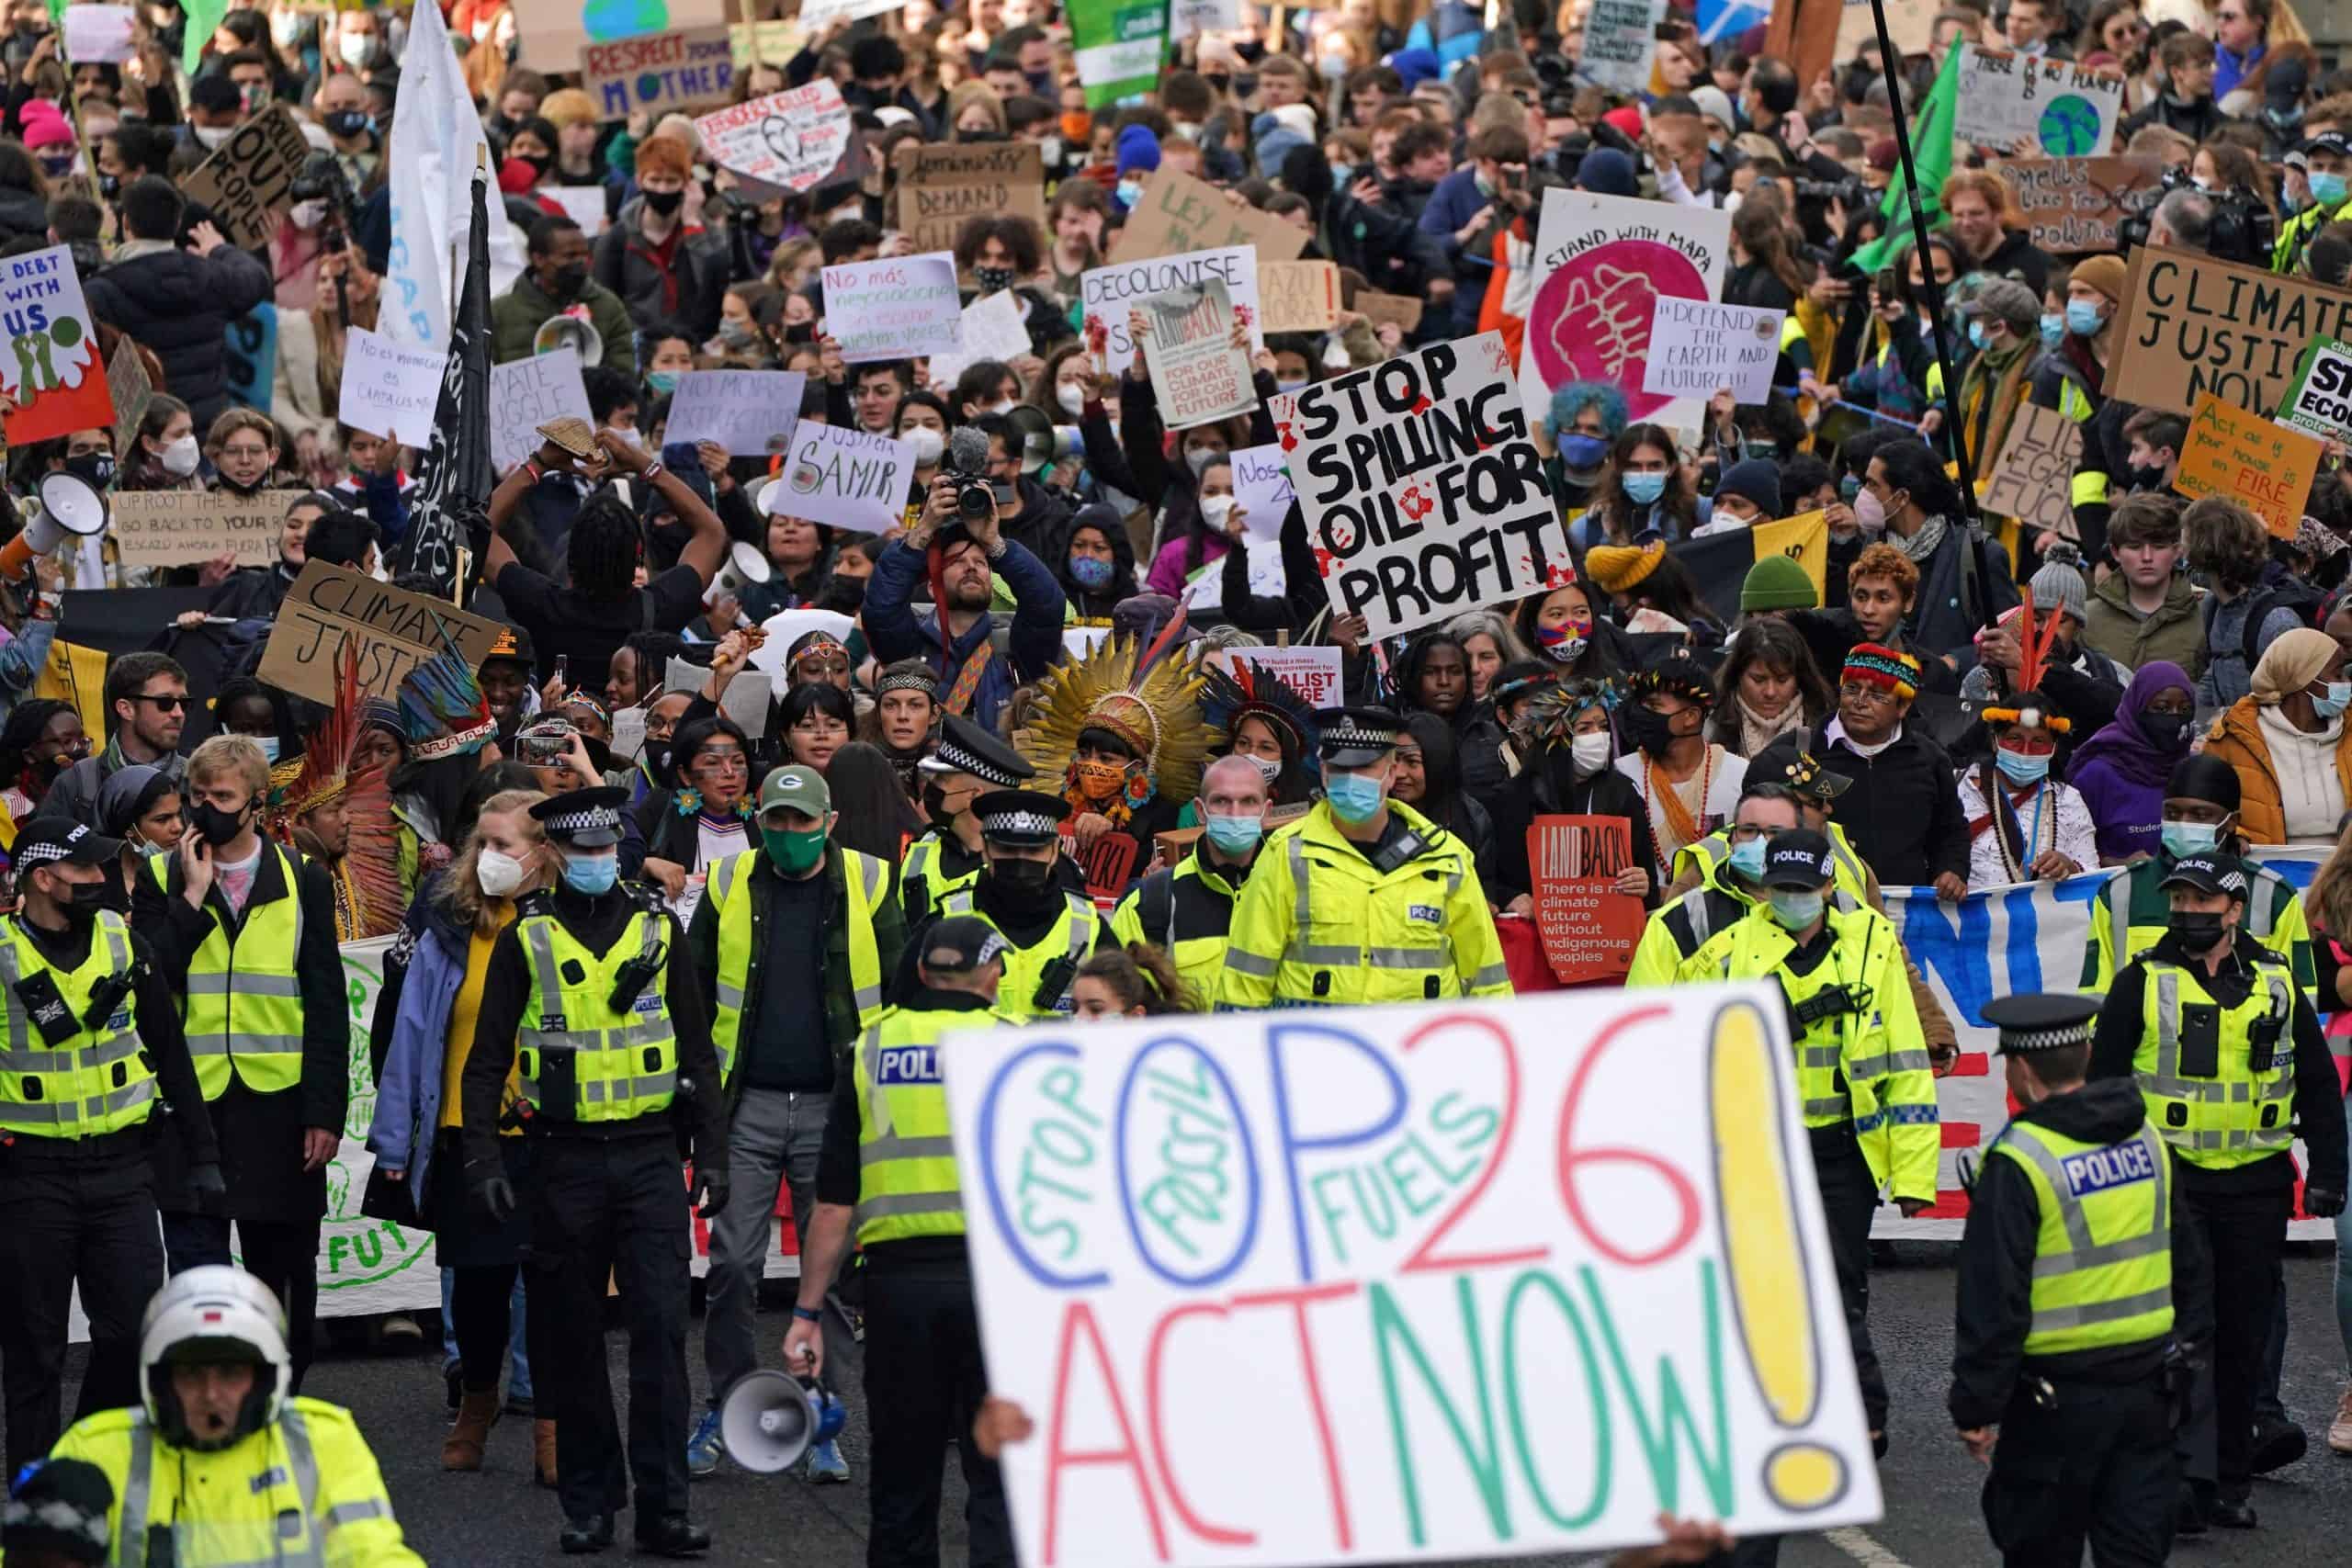 Thousands of young people join climate strike…but Education Sec tells pupils not to miss school